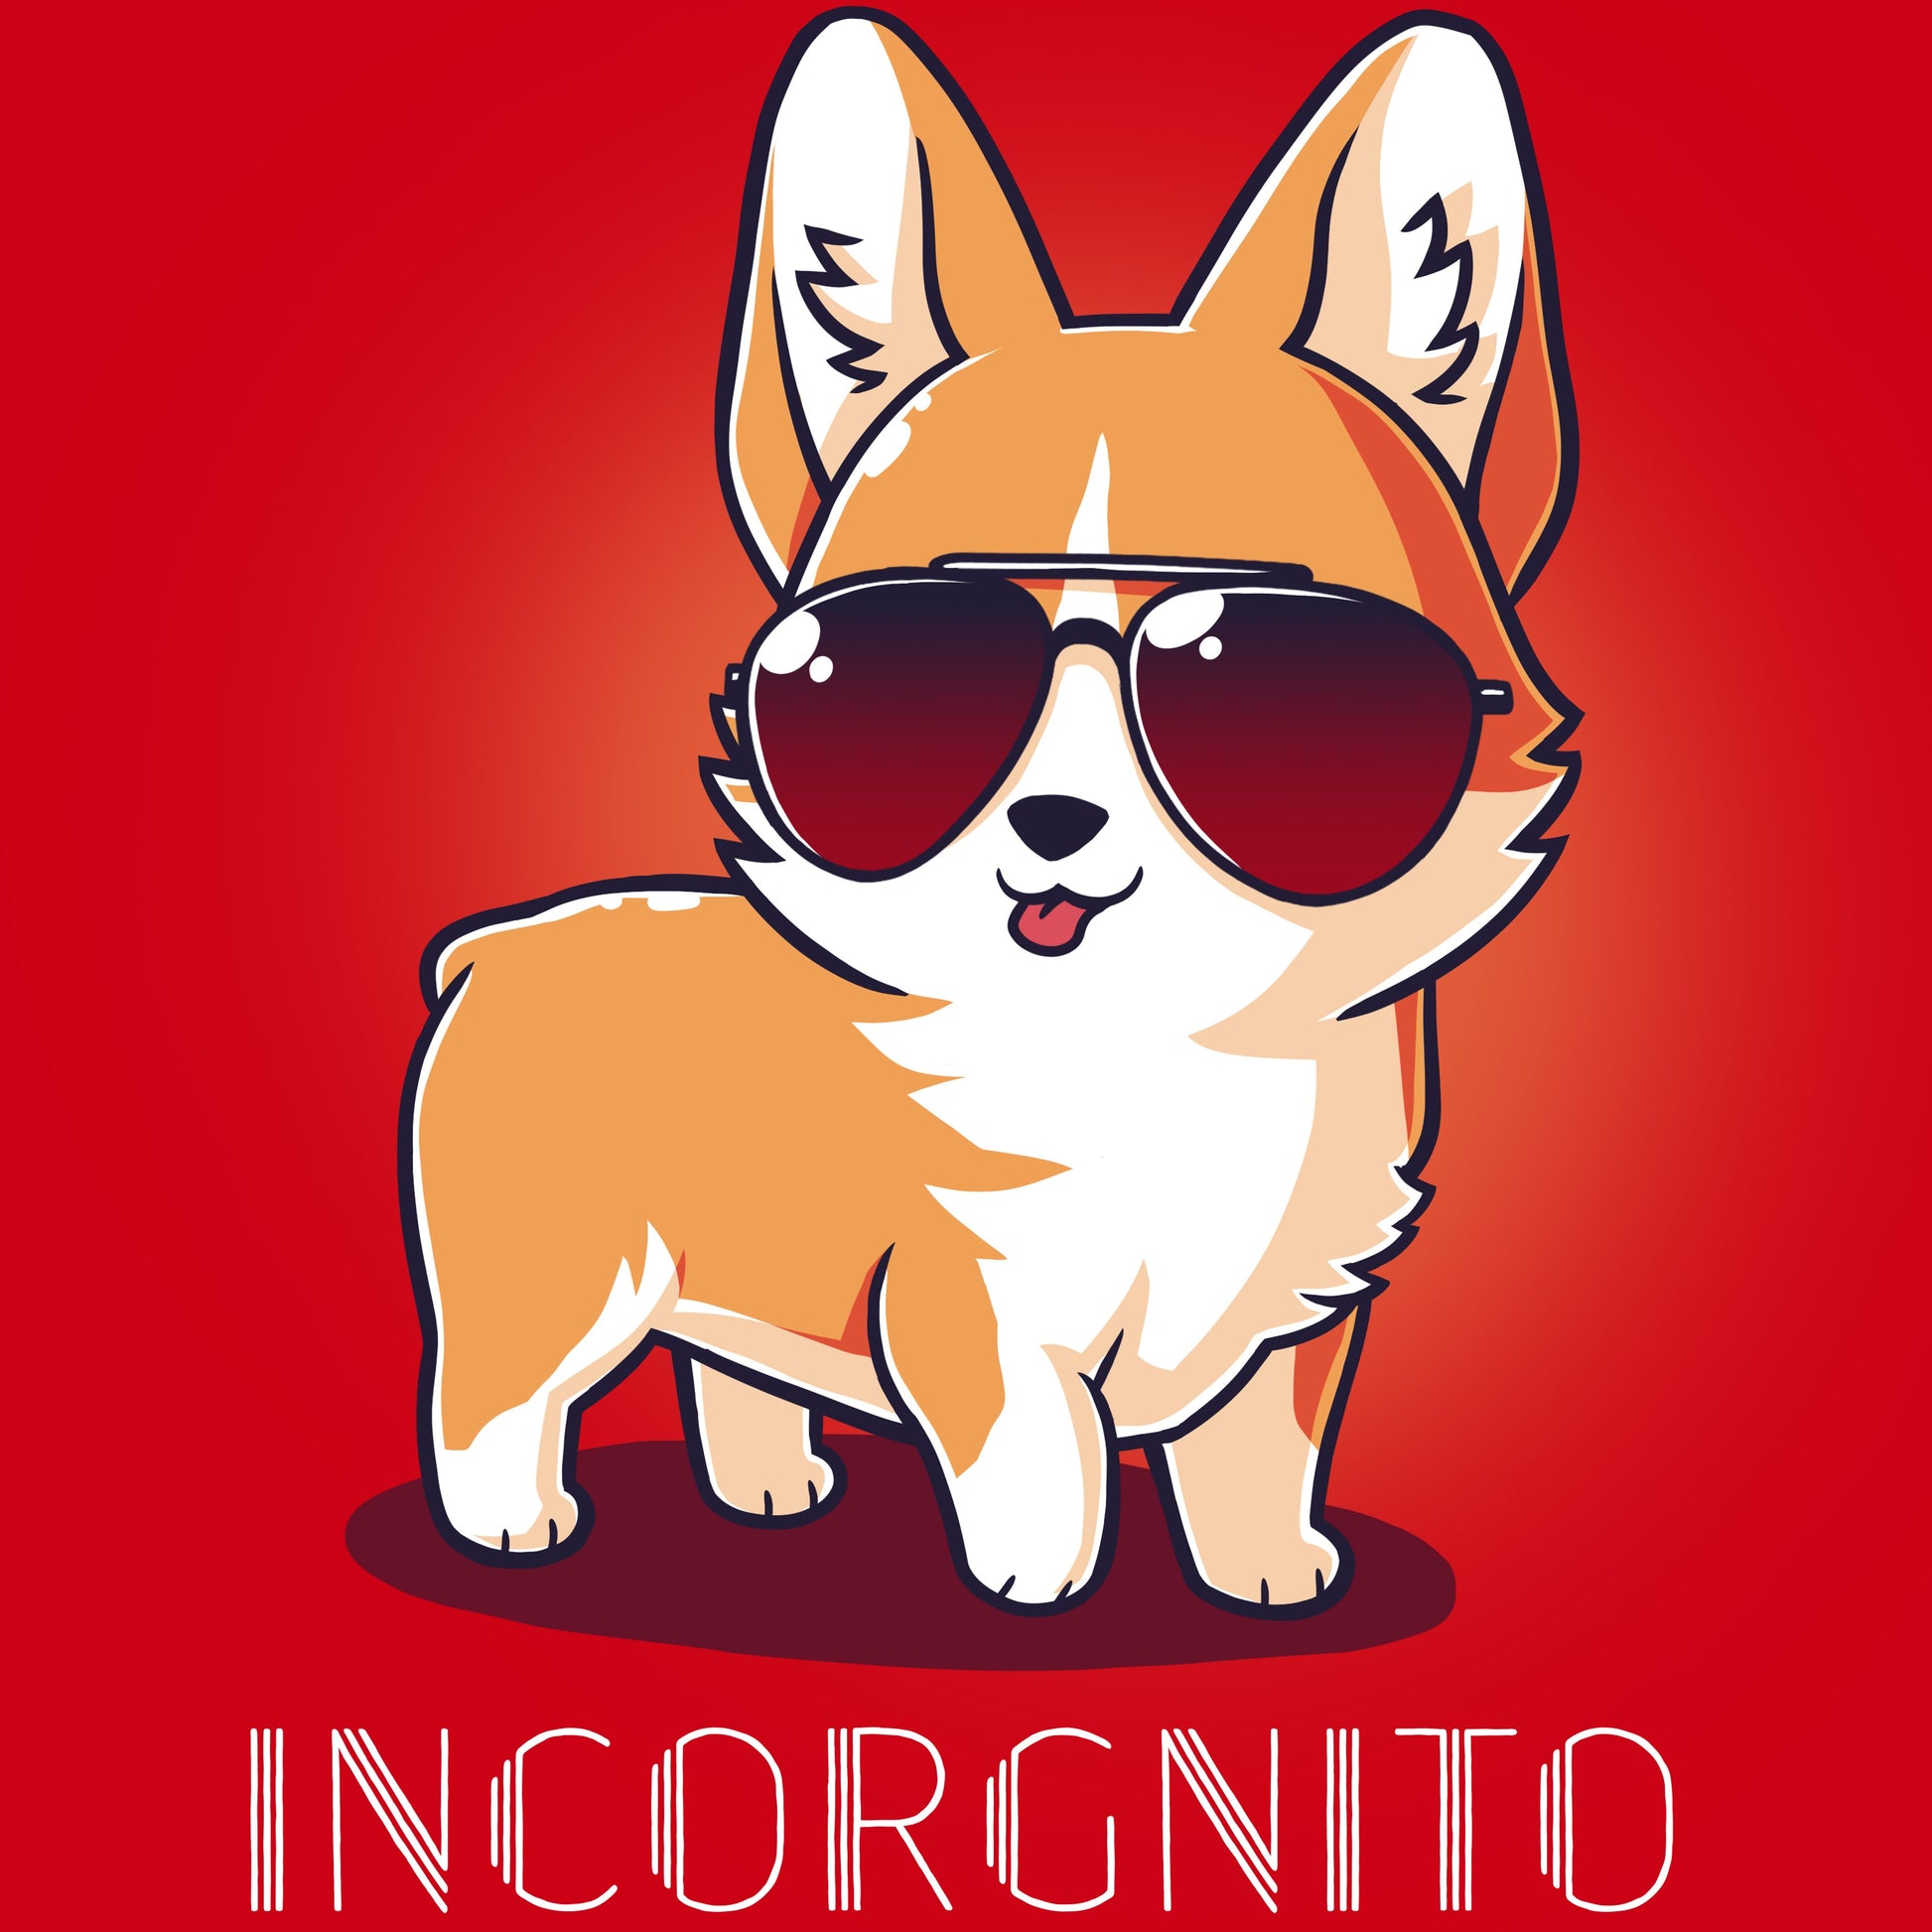 A hooman can find a TeeTurtle corgi wearing sunglasses on a red background at Incorgnito.